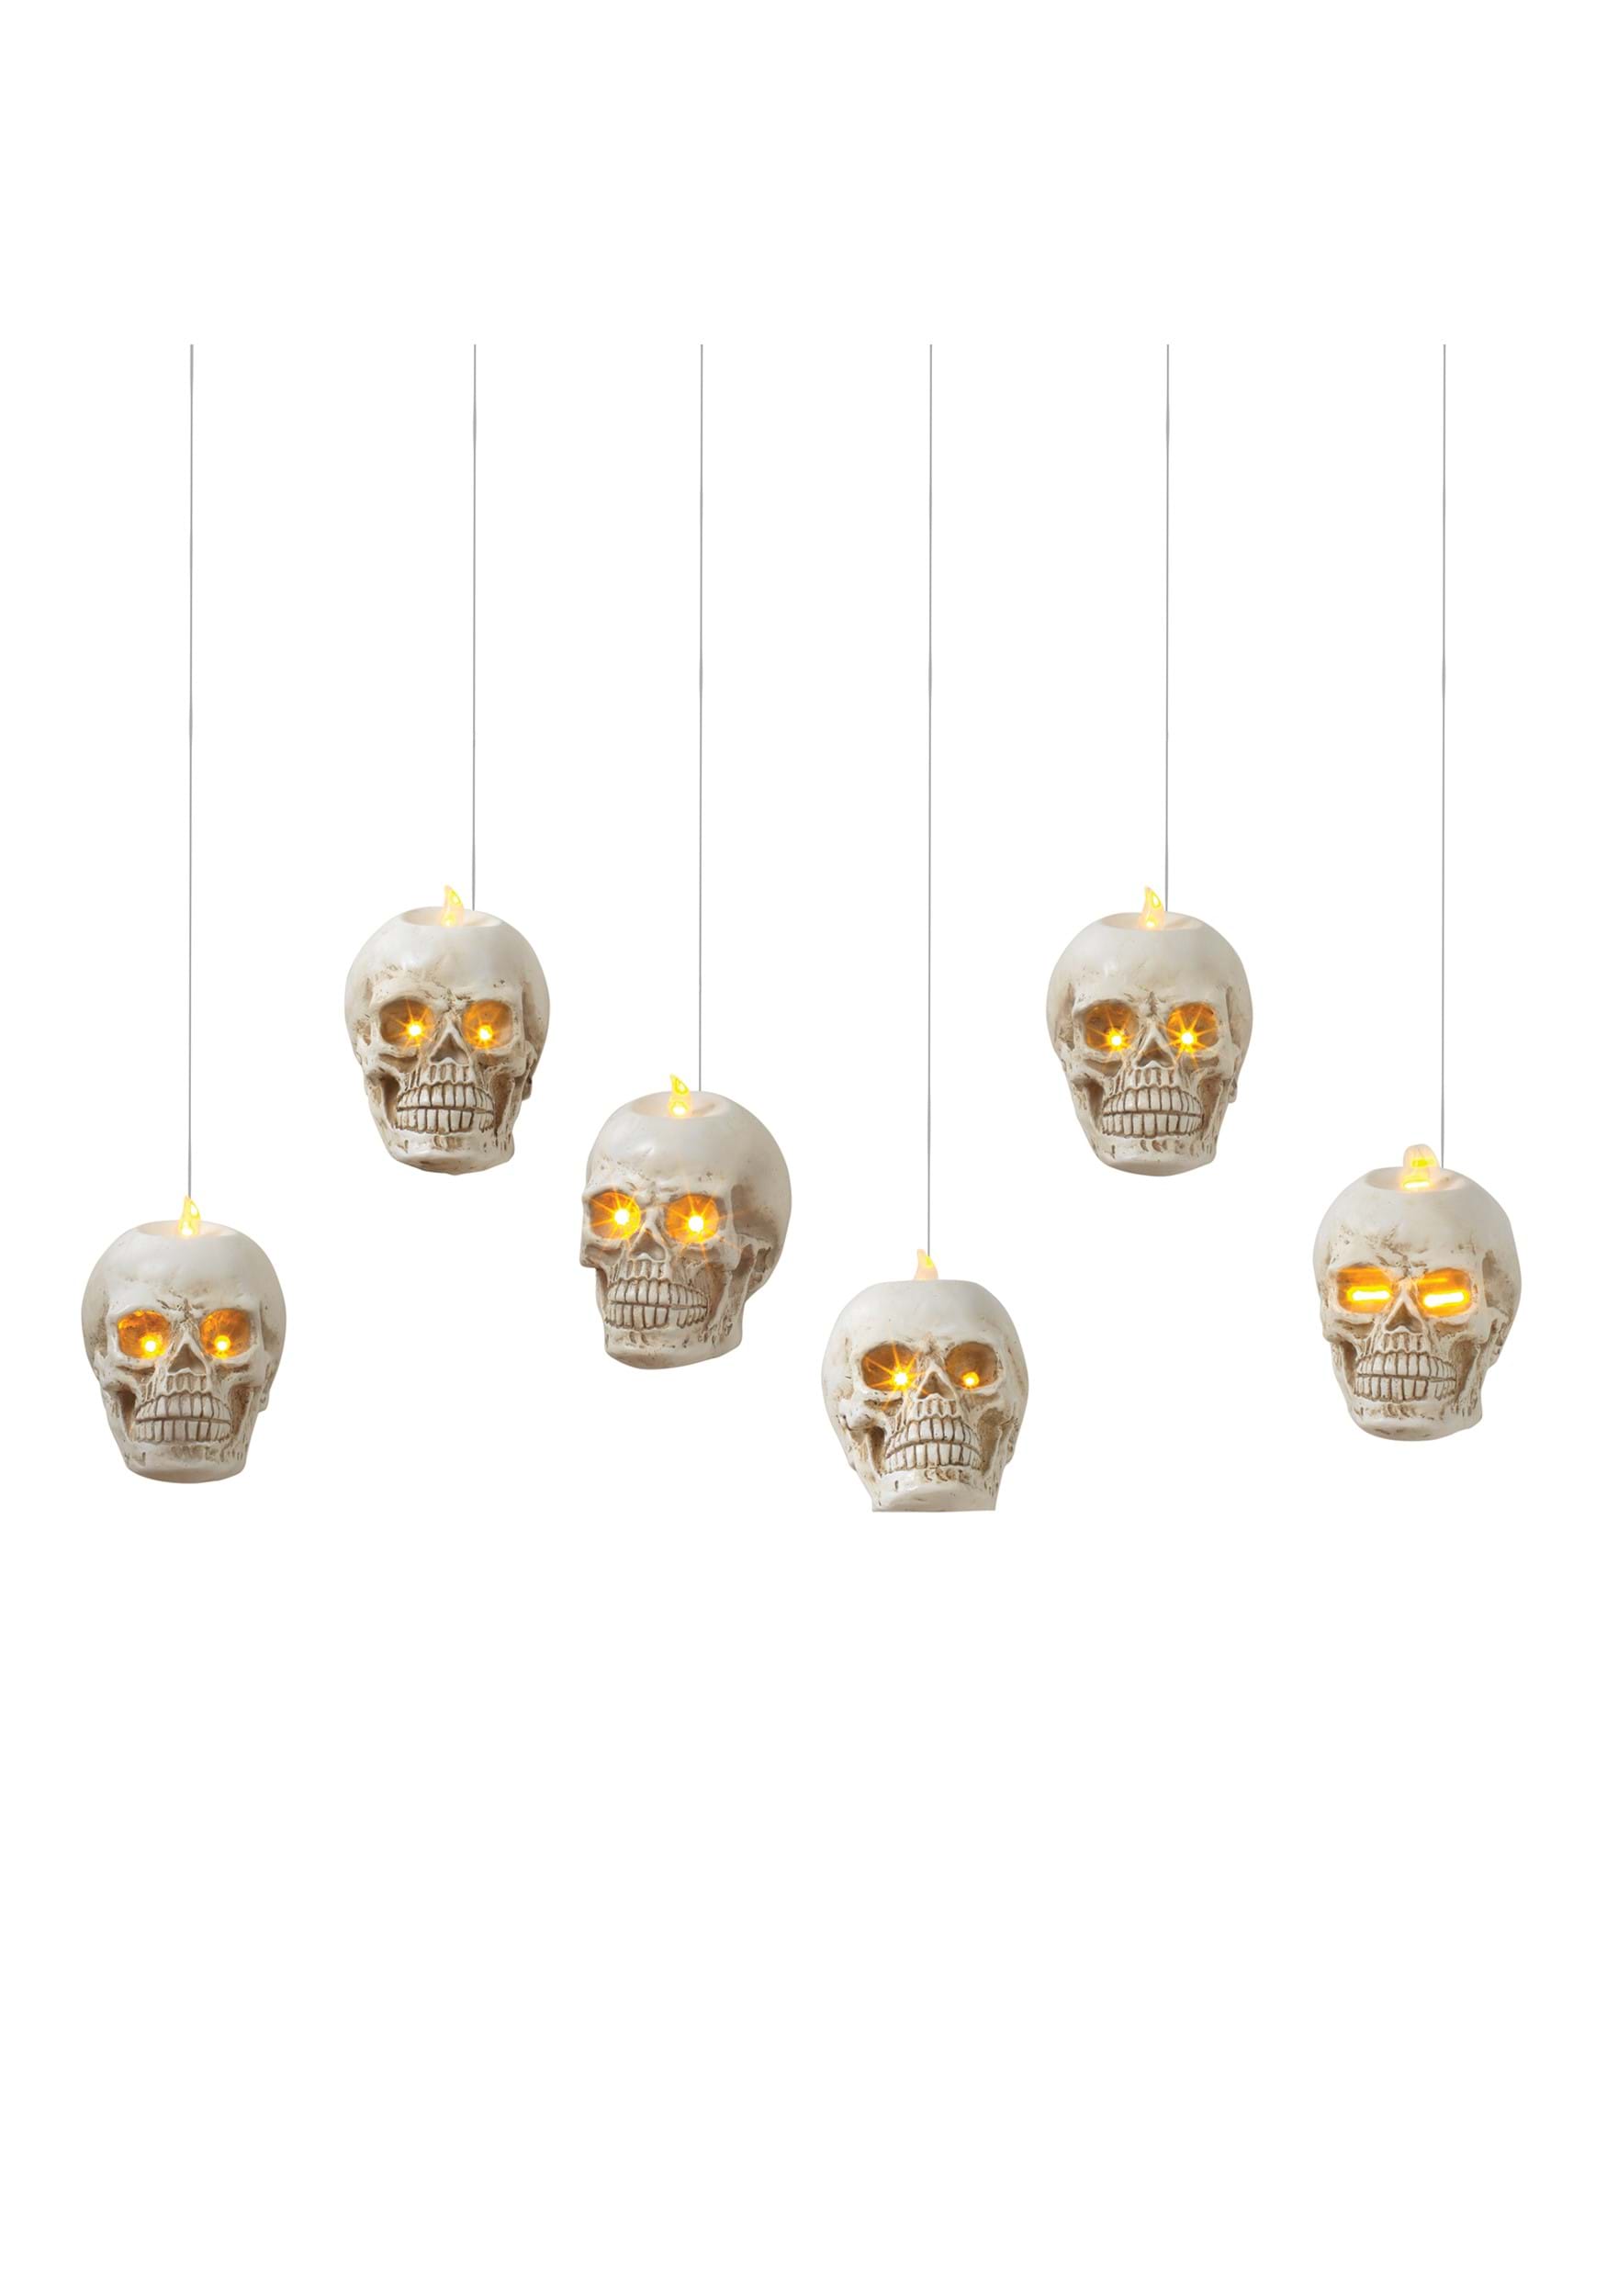 6 Lighted Hanging Skulls Decoration with Remote Control